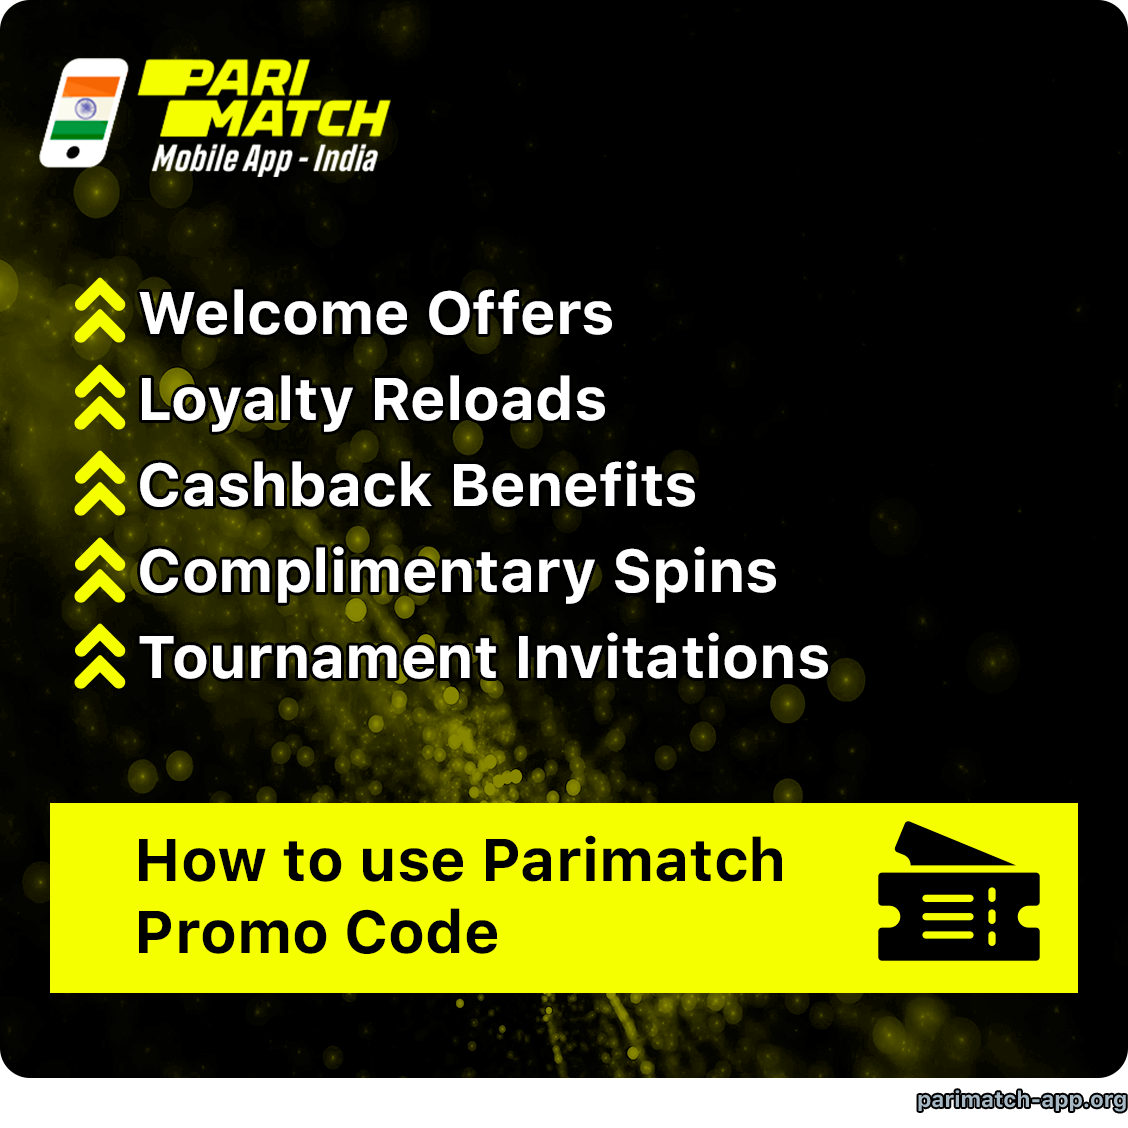 Parimatch App Promo Code Helps you to Boost Multiple Bonuses for Casino and Sports Betting